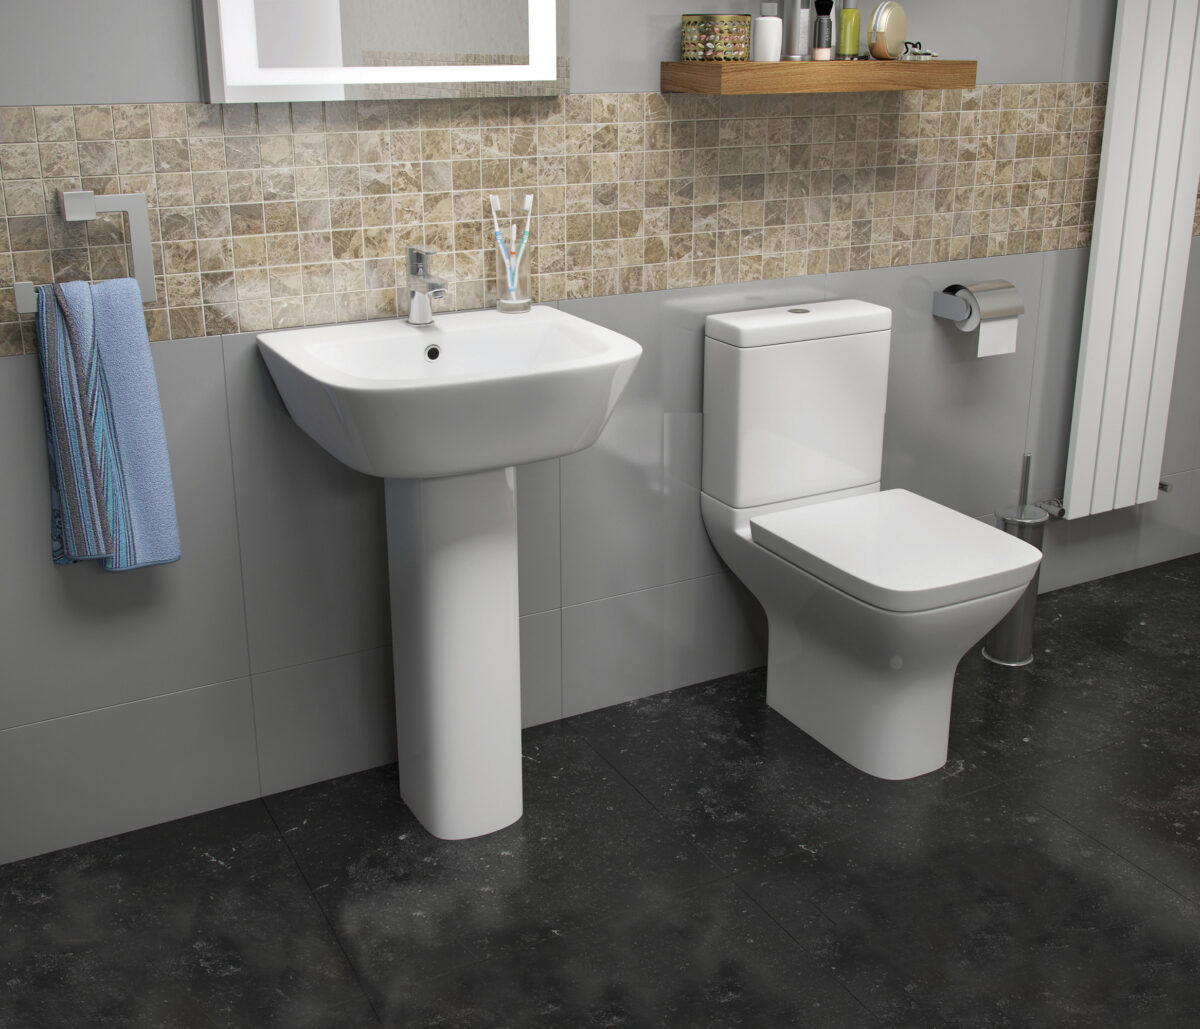 PROJECT SQUARE - Premier Tiles and Bathrooms